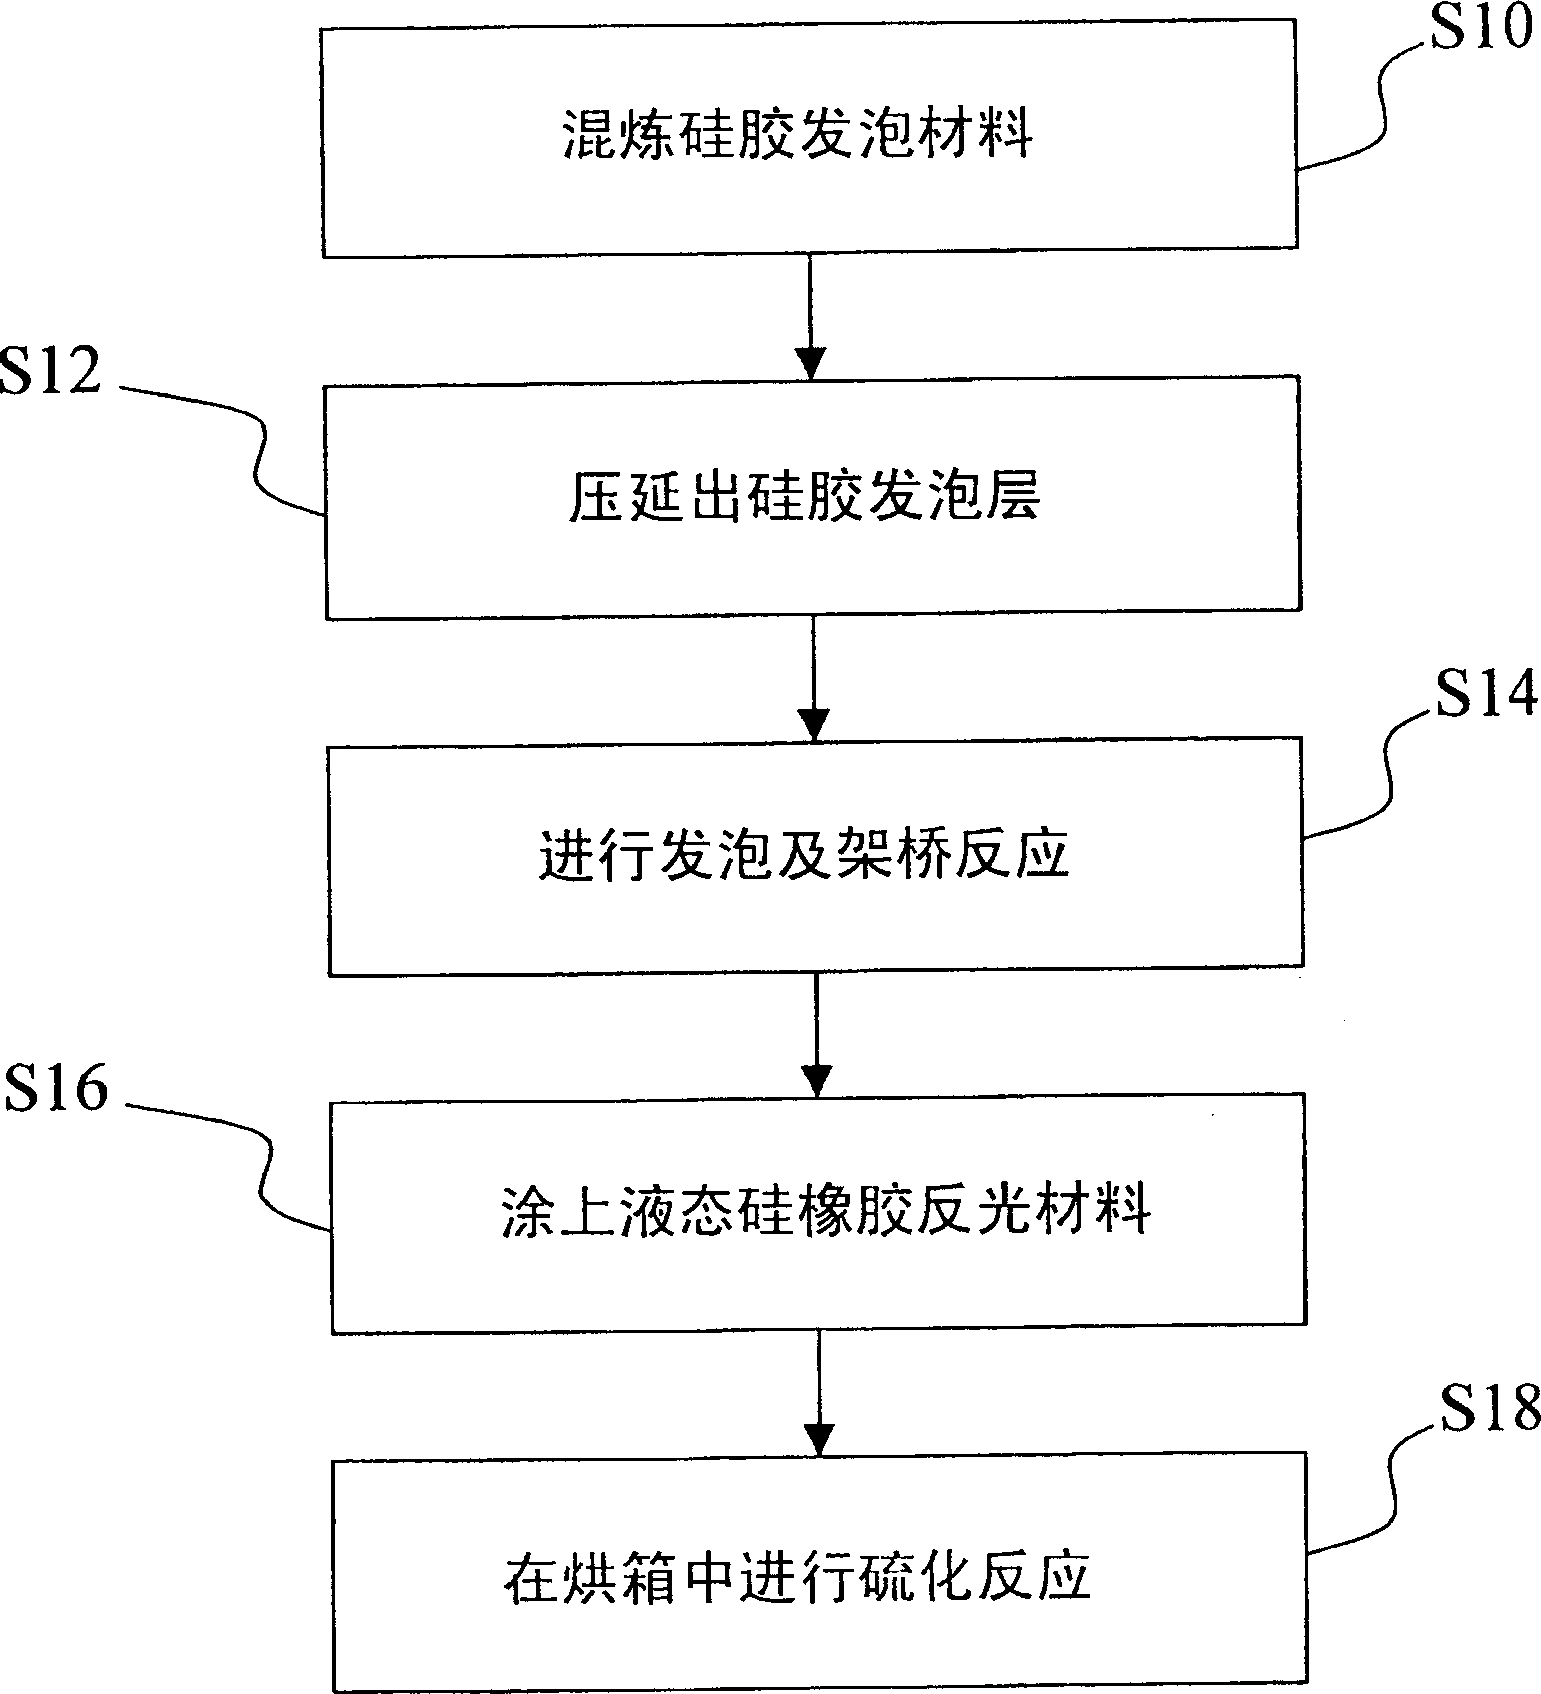 Materials composition and processing method for composite fiber